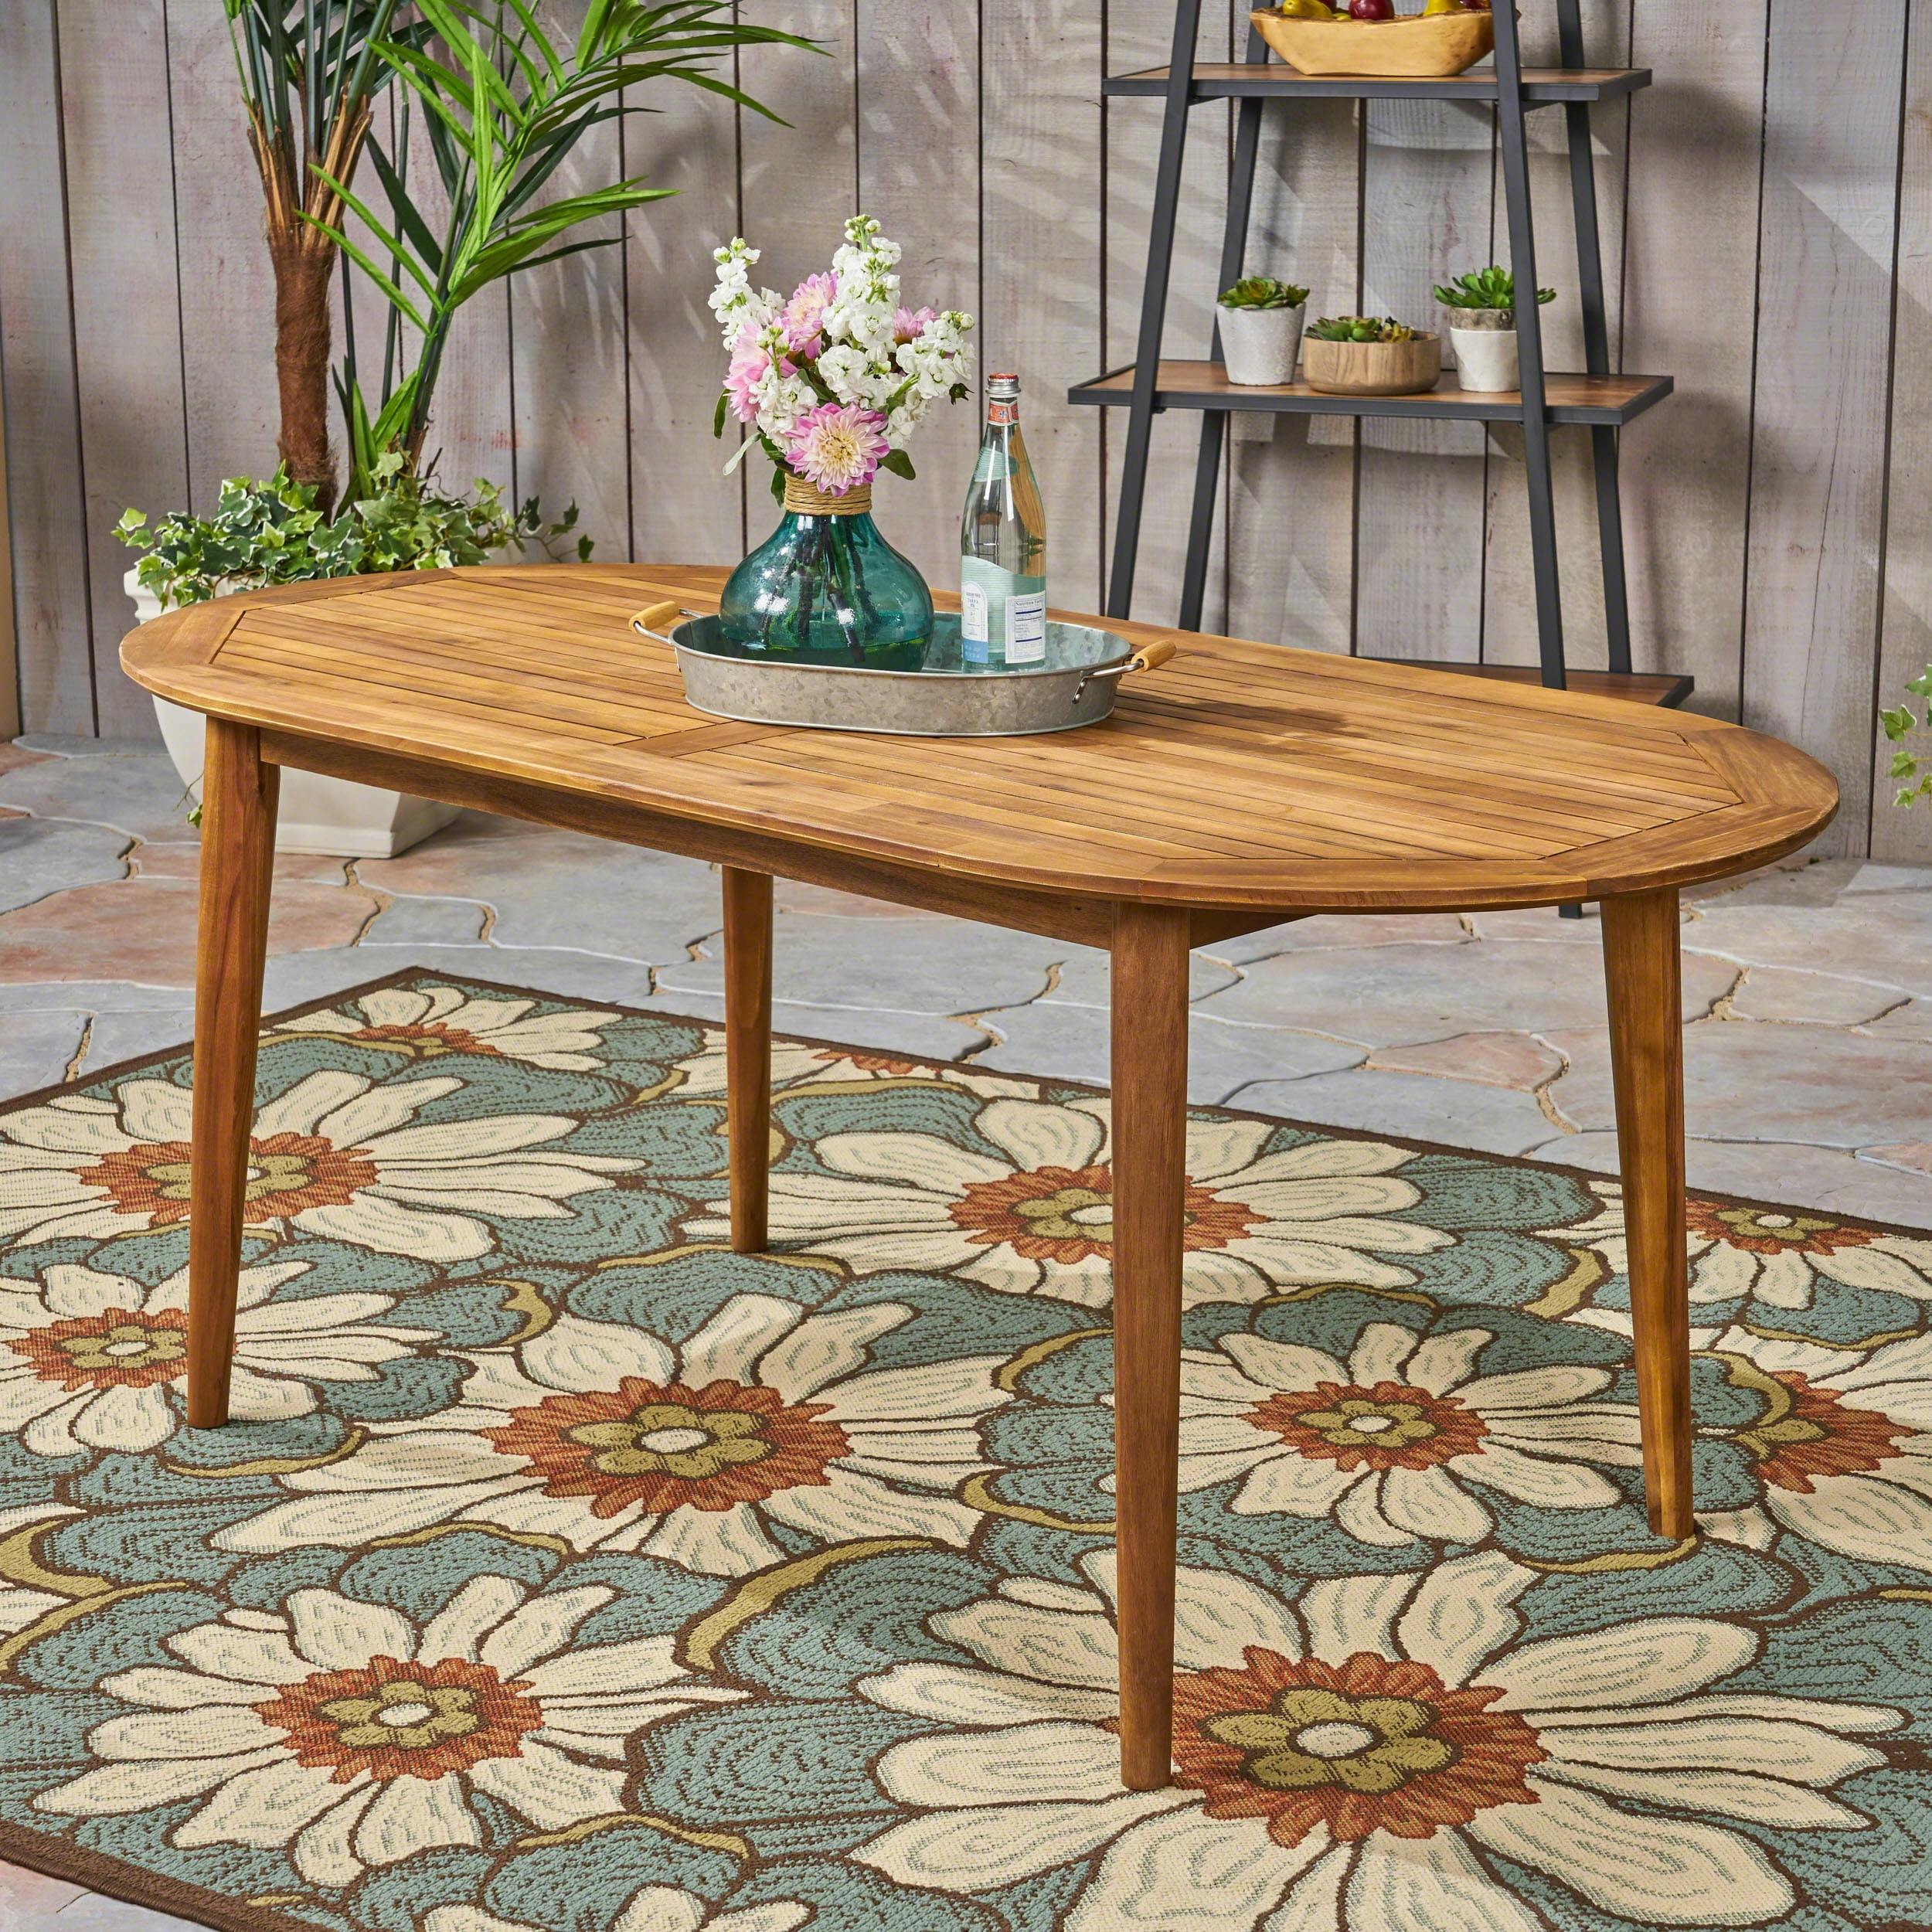 Chic 71" Teak Acacia Wood Oval Outdoor Dining Table